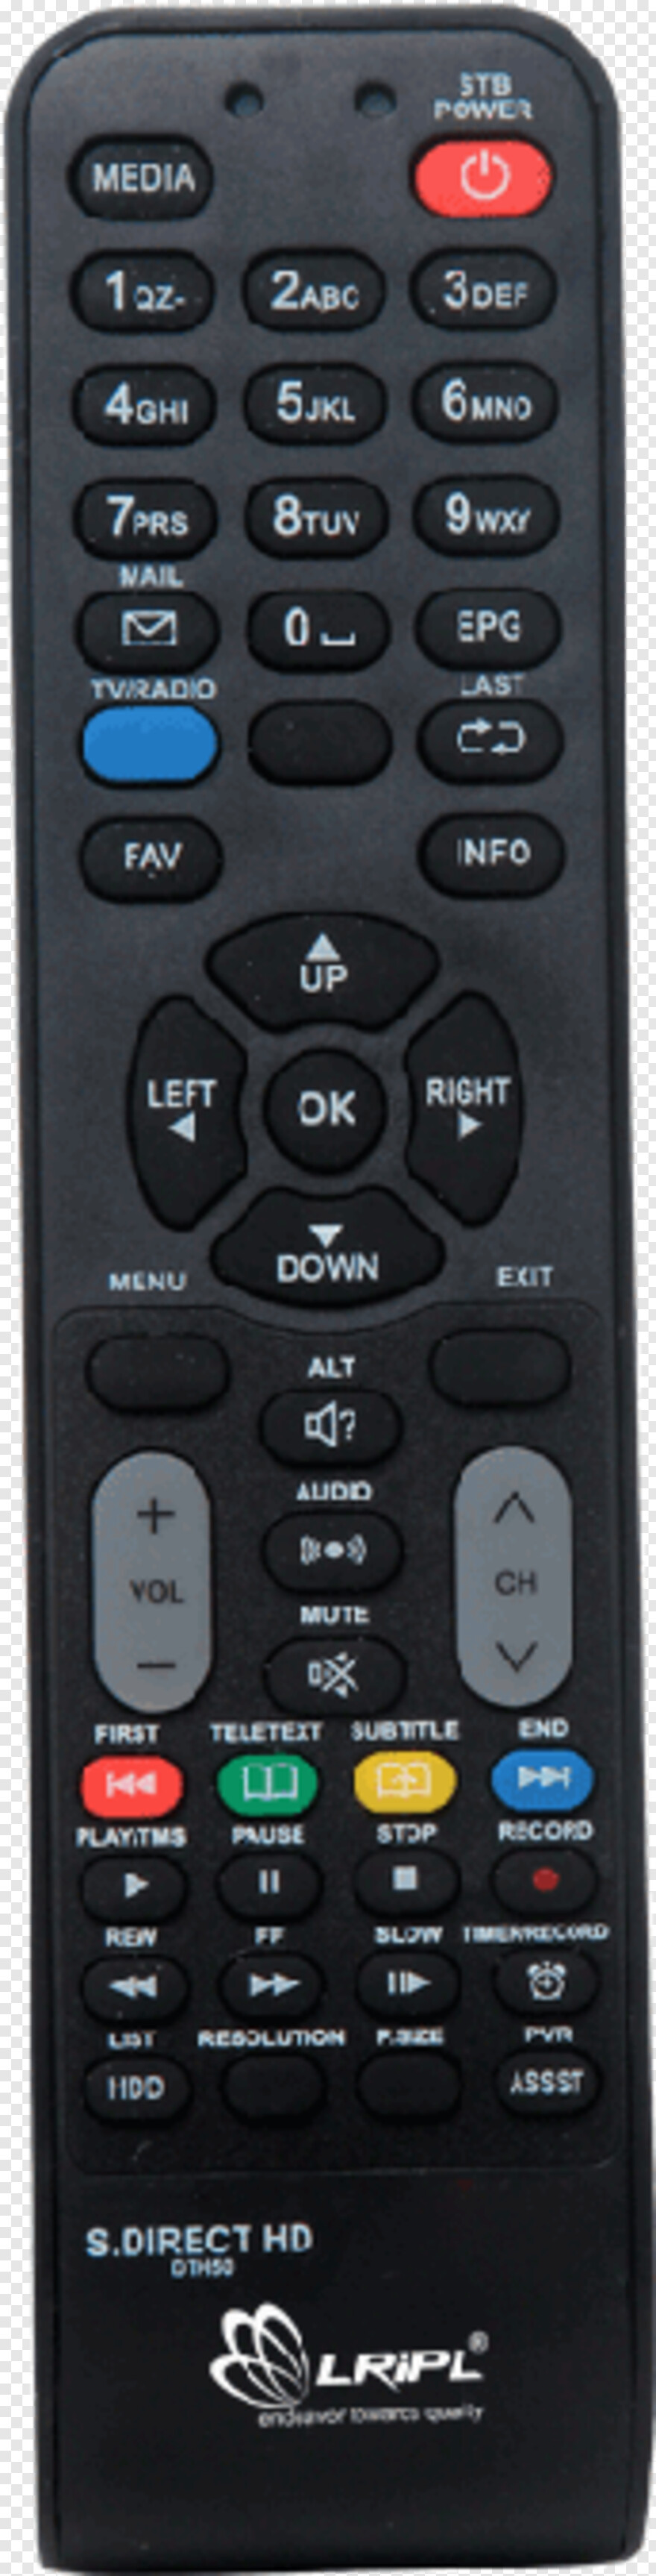  Remote, Universal Pictures Logo, Fire Works, Universal Studios Logo, Tv Remote, Universal Logo